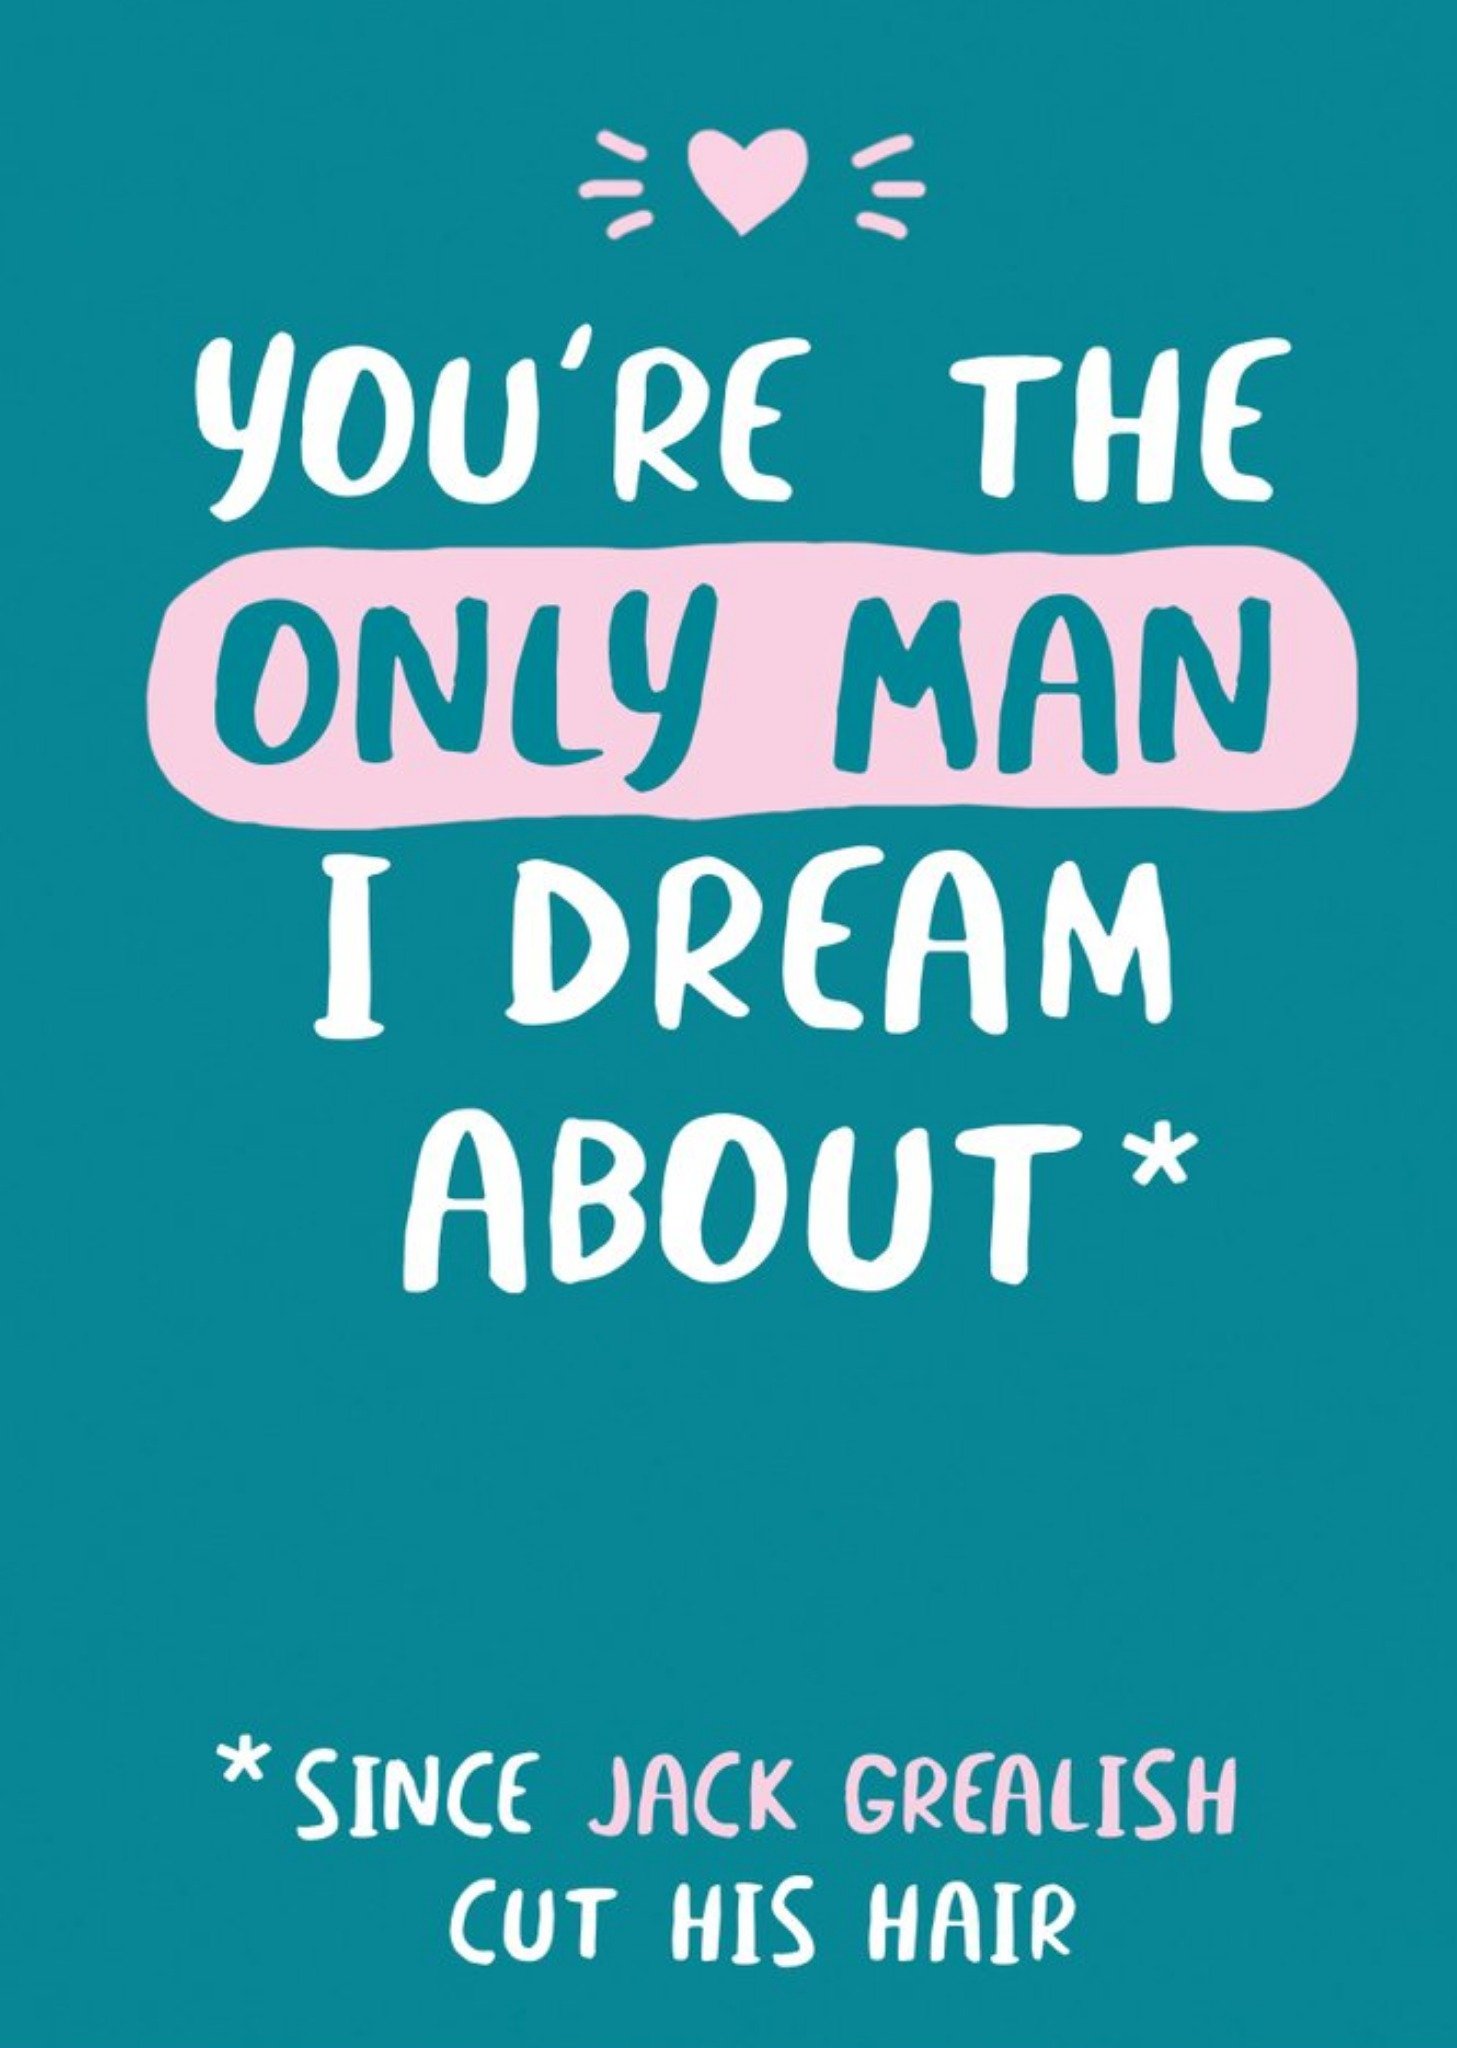 Moonpig Banter Illustrated Funny Quote Sports Dream Adult Humour Card Ecard